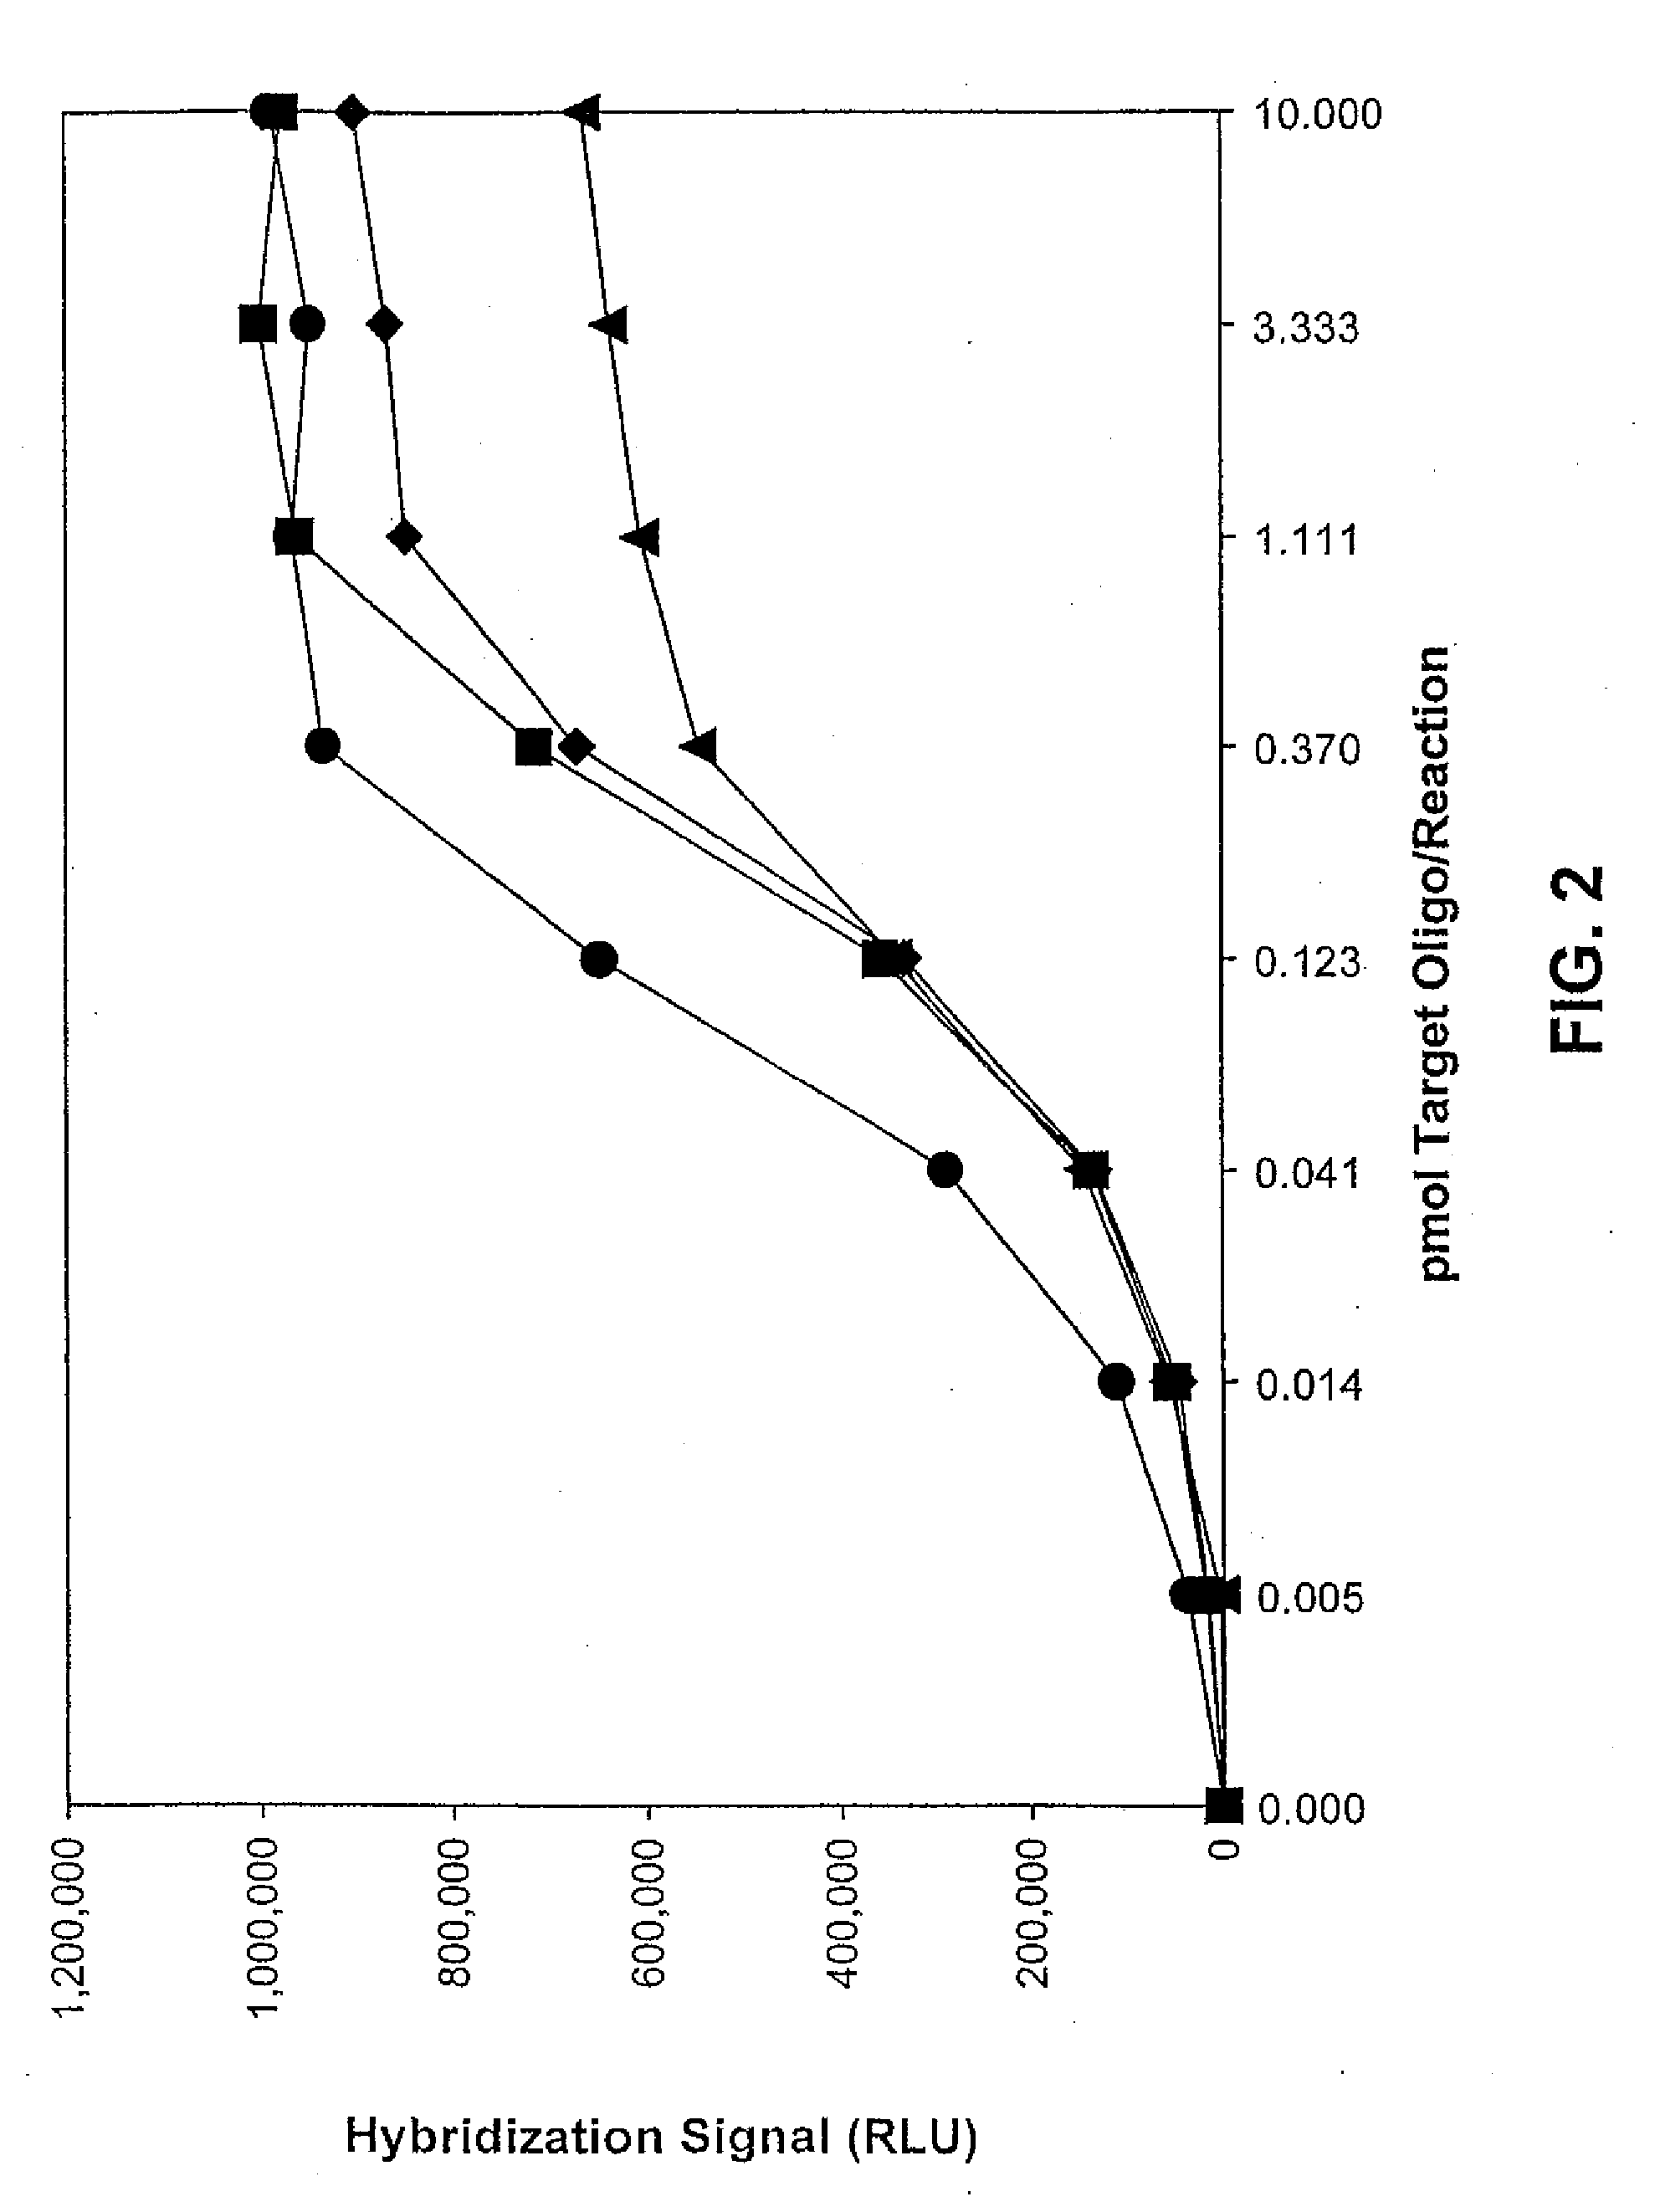 Method for detecting west nile virus nucleic acids in the 3' non-coding region